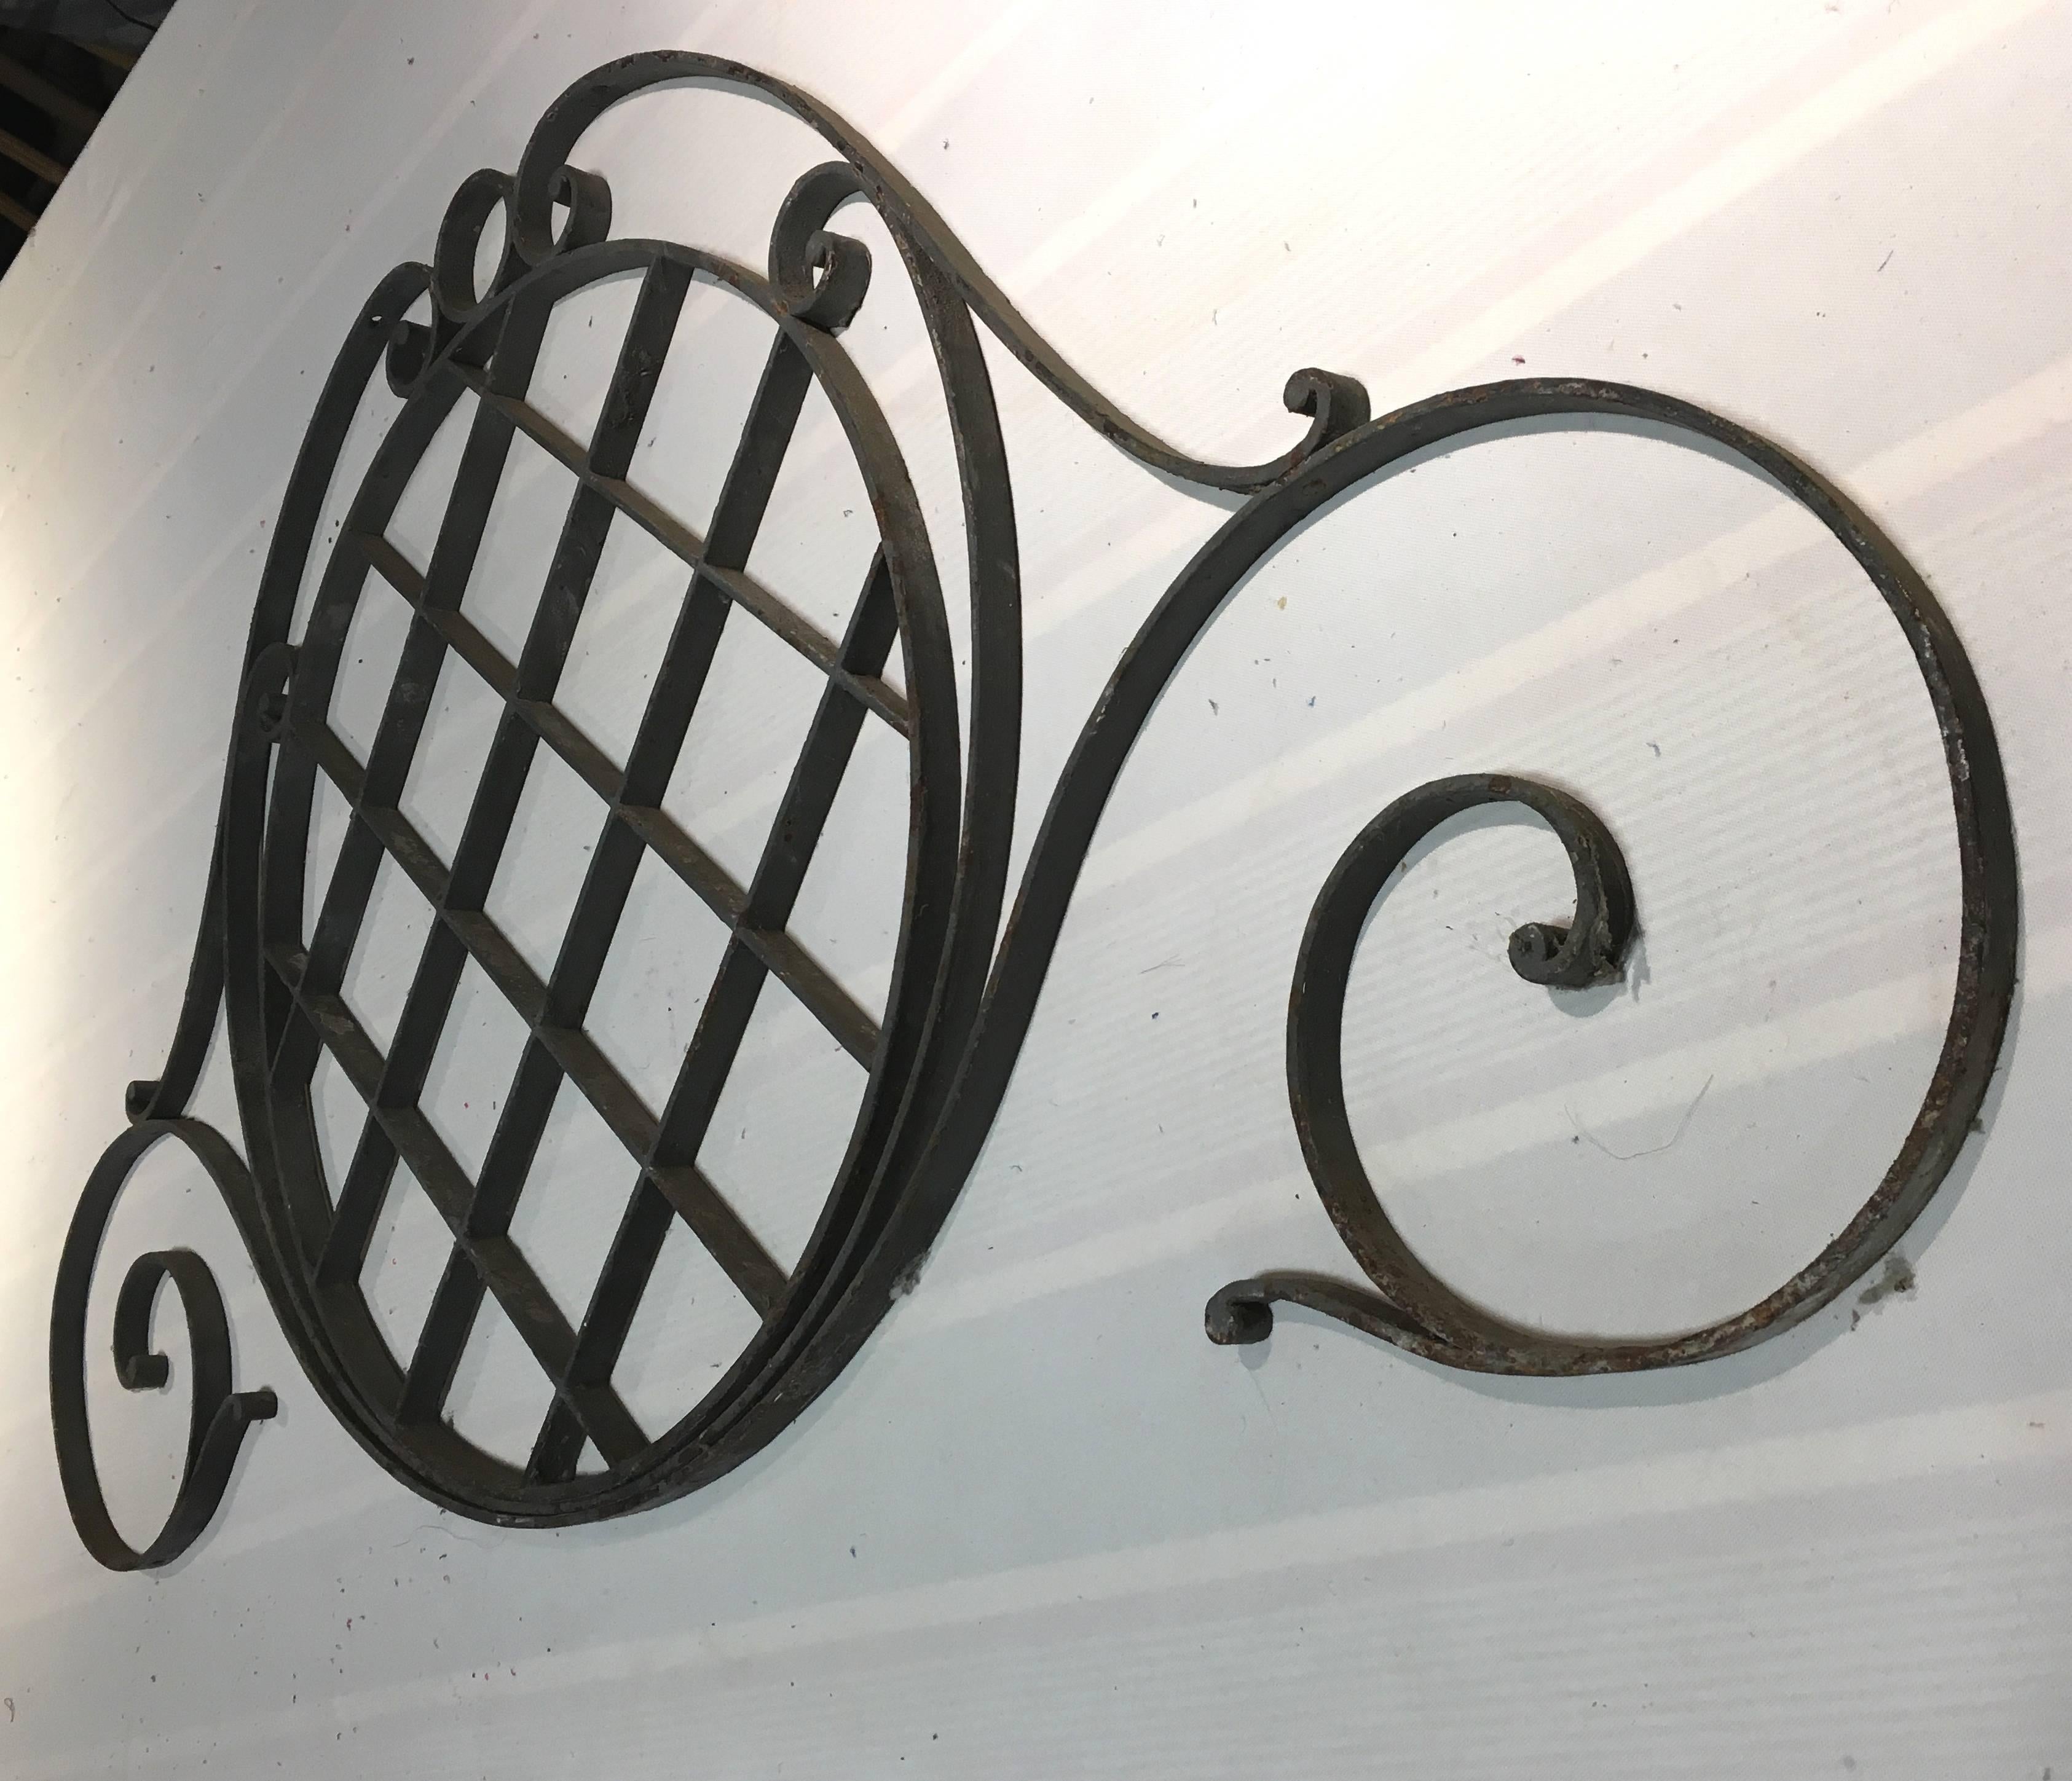 A late 19th century French architectural grill in wrought iron with its original dark grey painted finish. Could be used as an iron headboard or as a crest on a mirror.